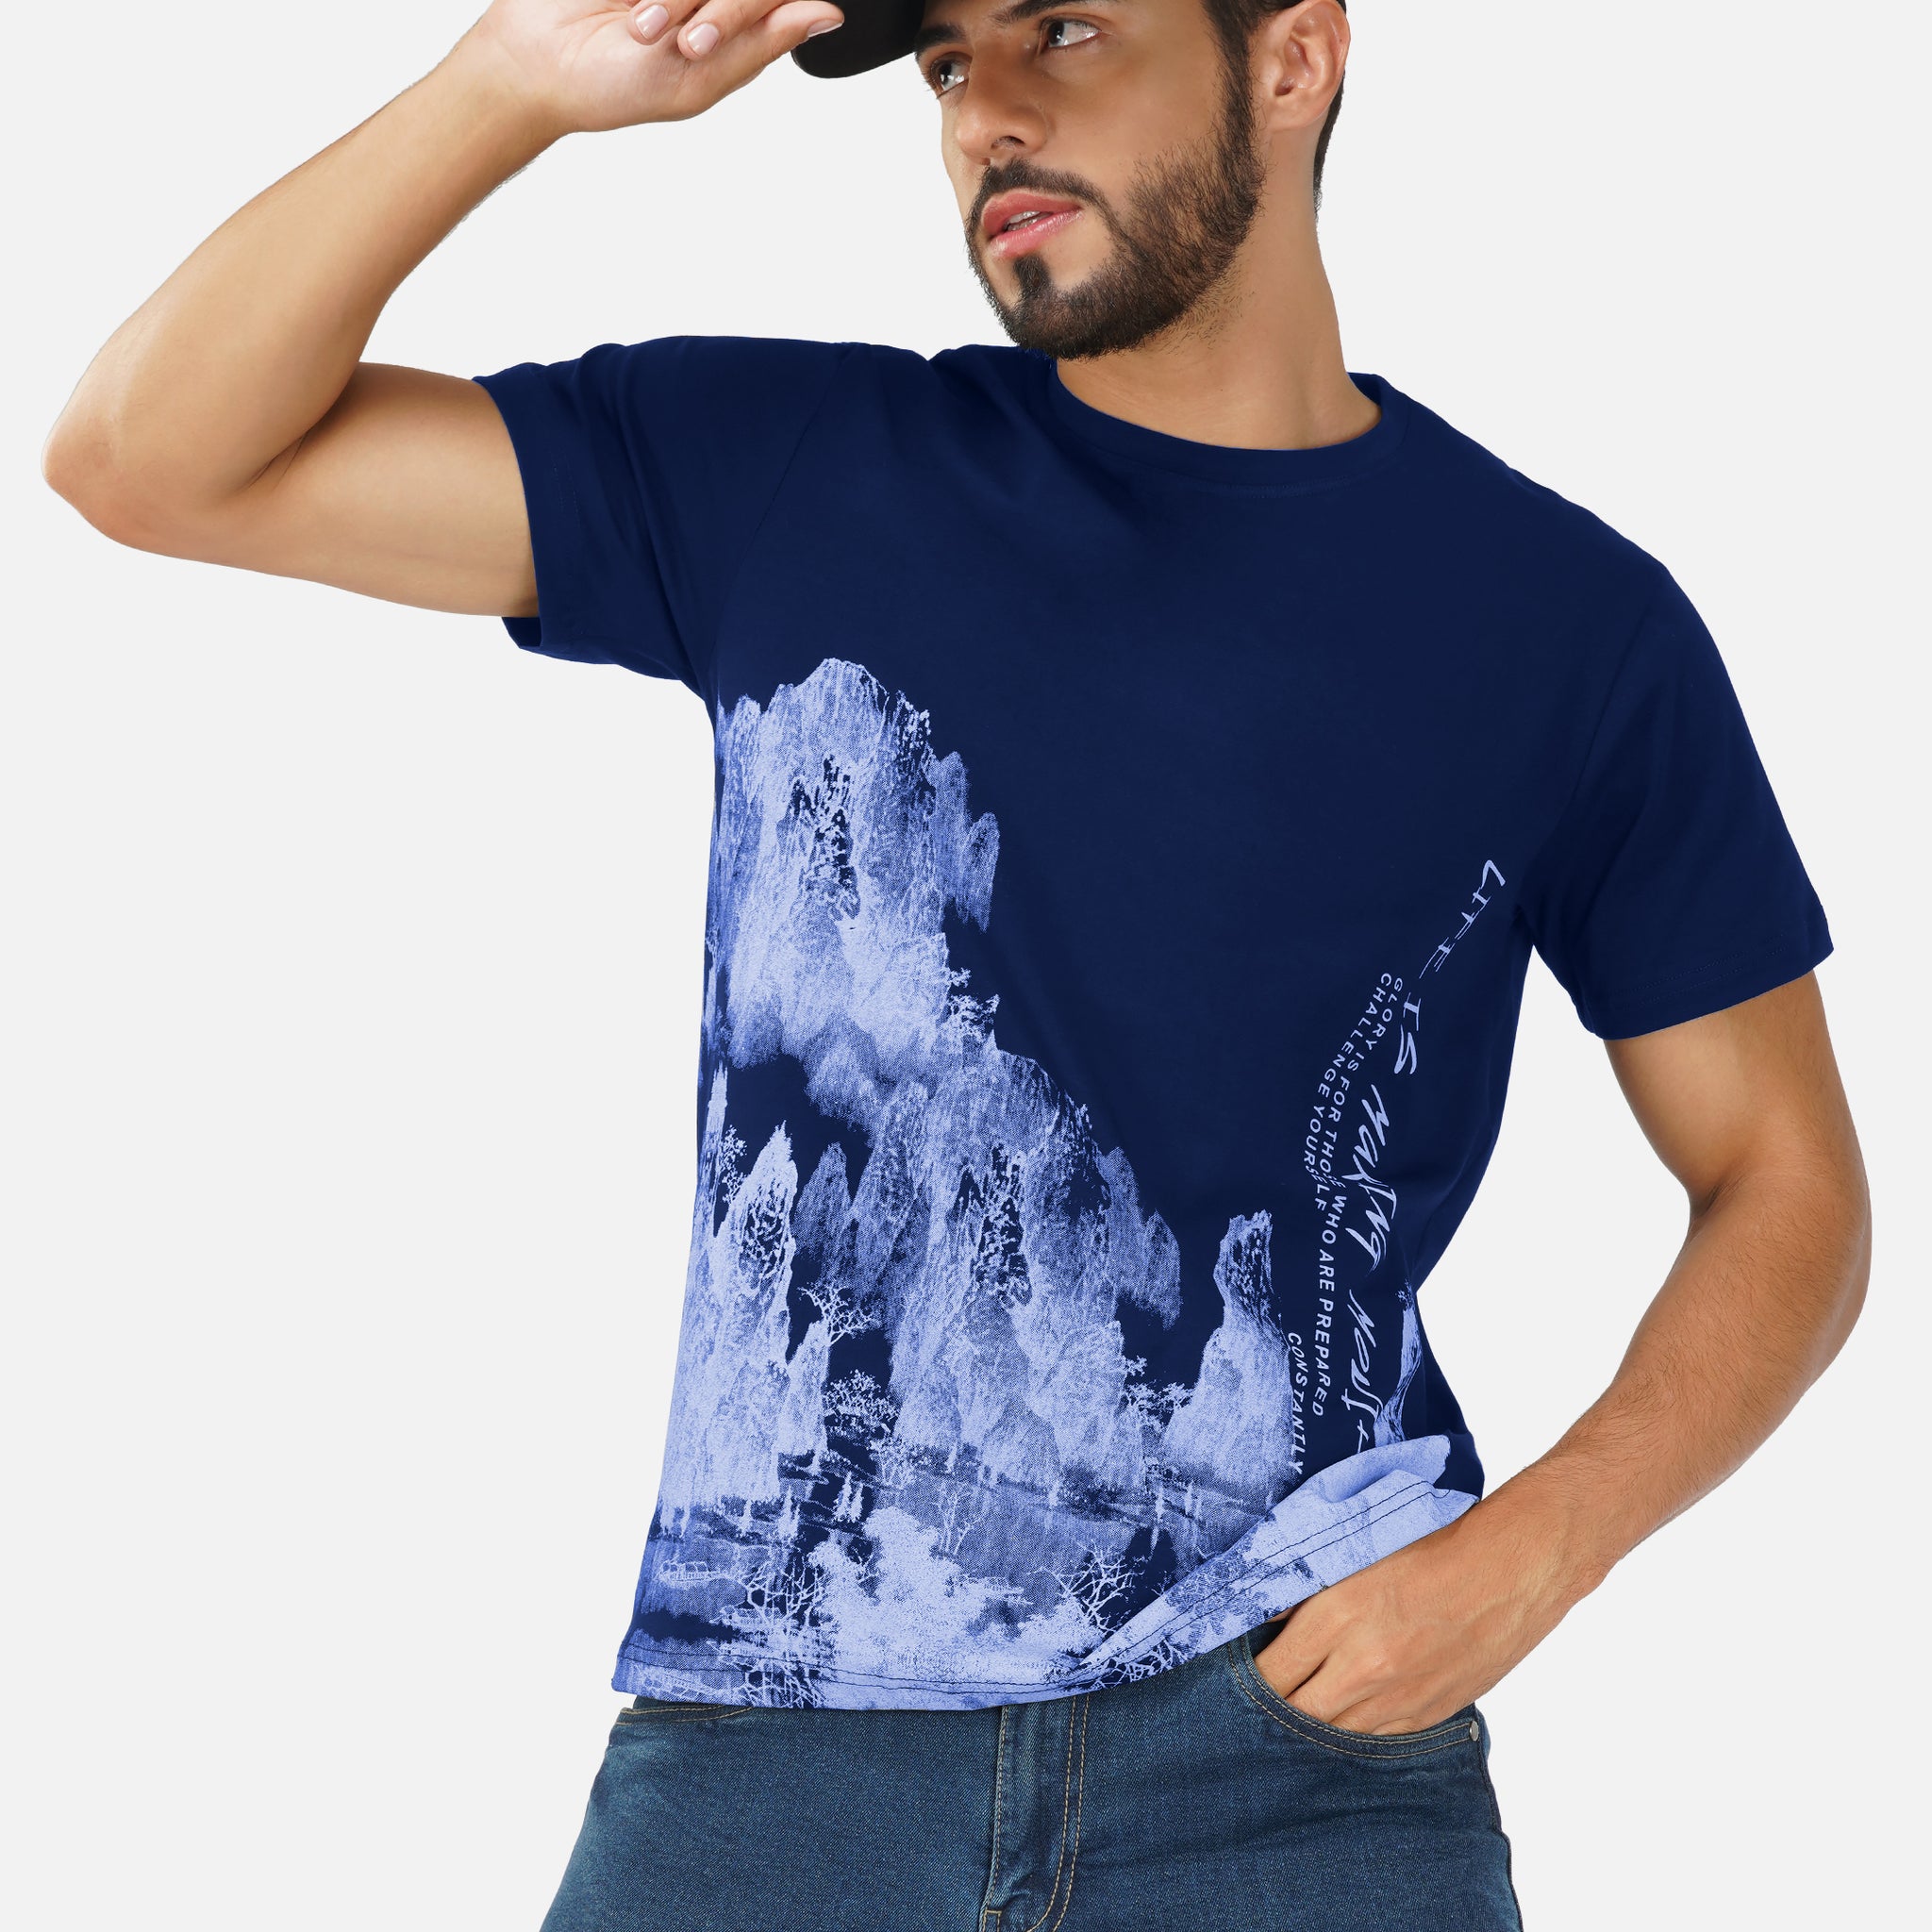 LIFE IS MAKING MOVIES MOUNTAIN PRINT ROUND NECK TSHIRT NAVY COLOR